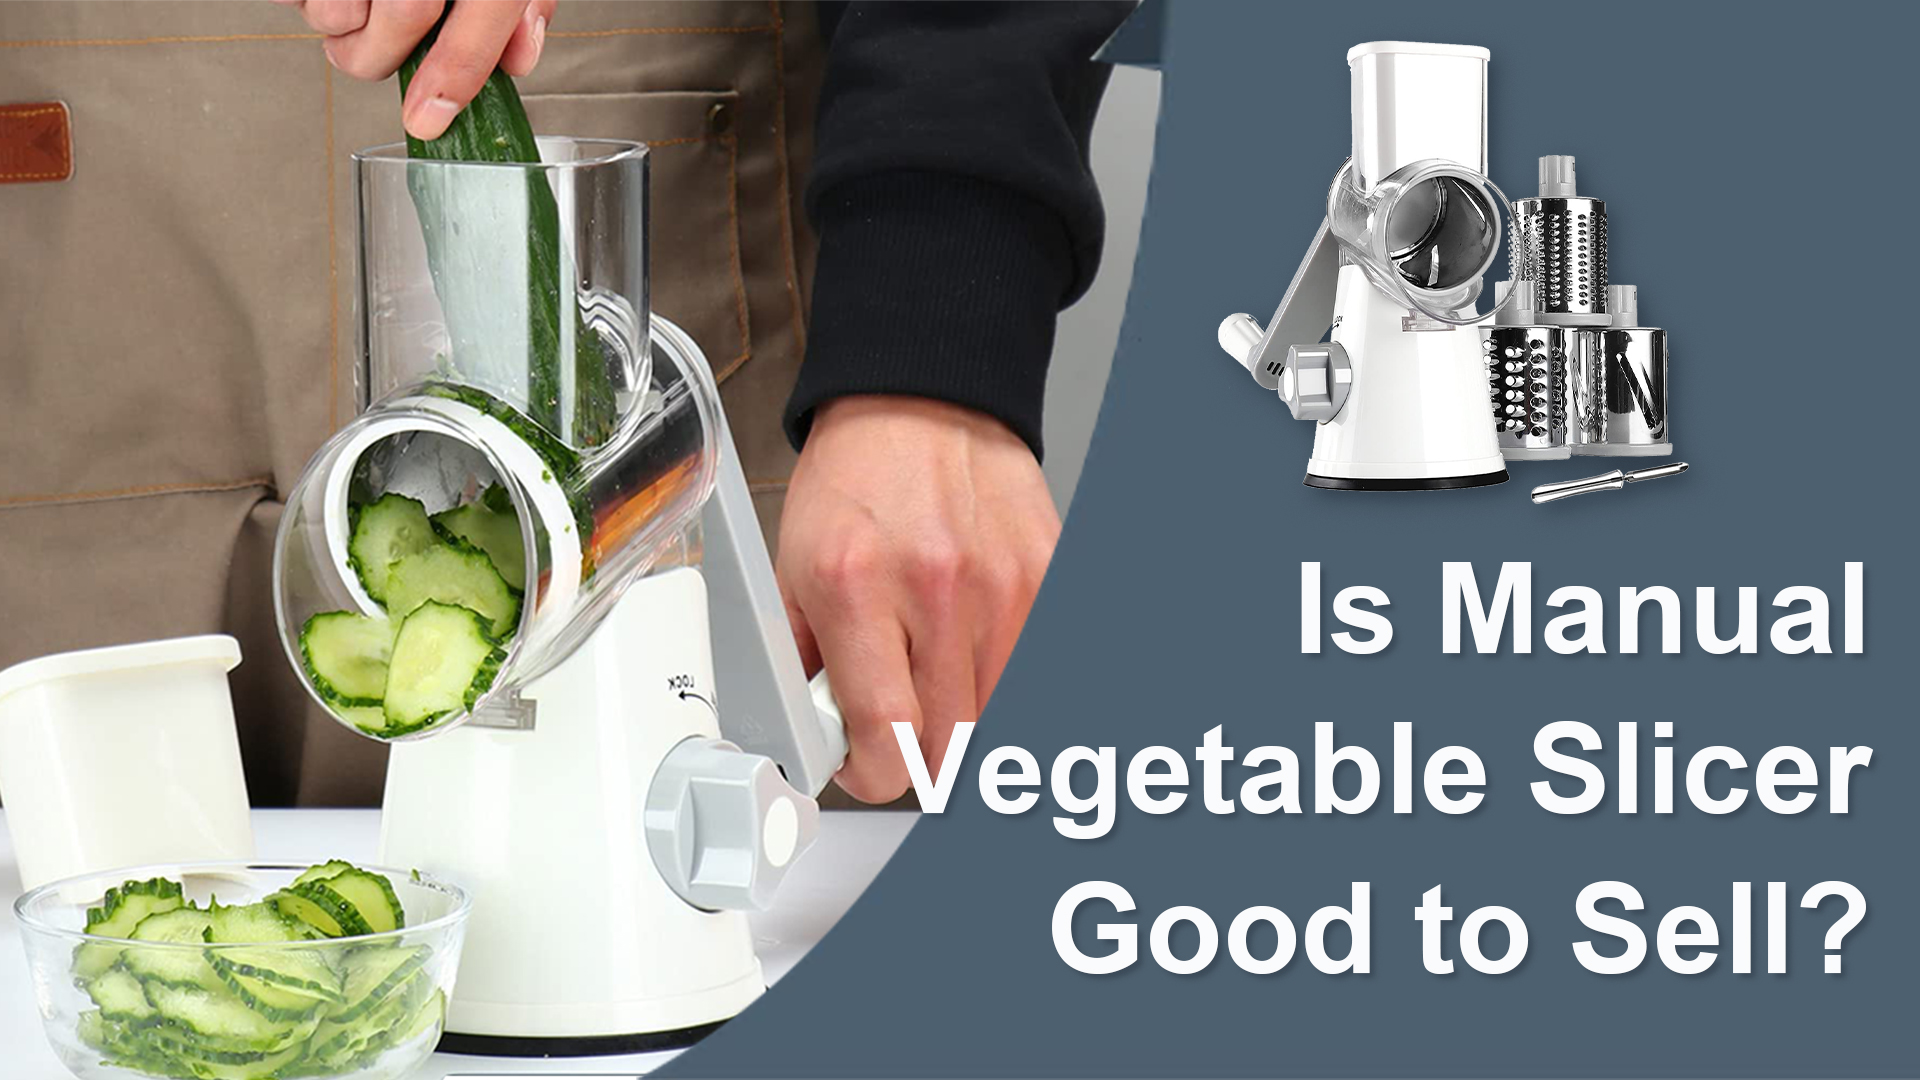 Dropship 1 Set Stainless Steel Vegetable Slicer With 5 Blades